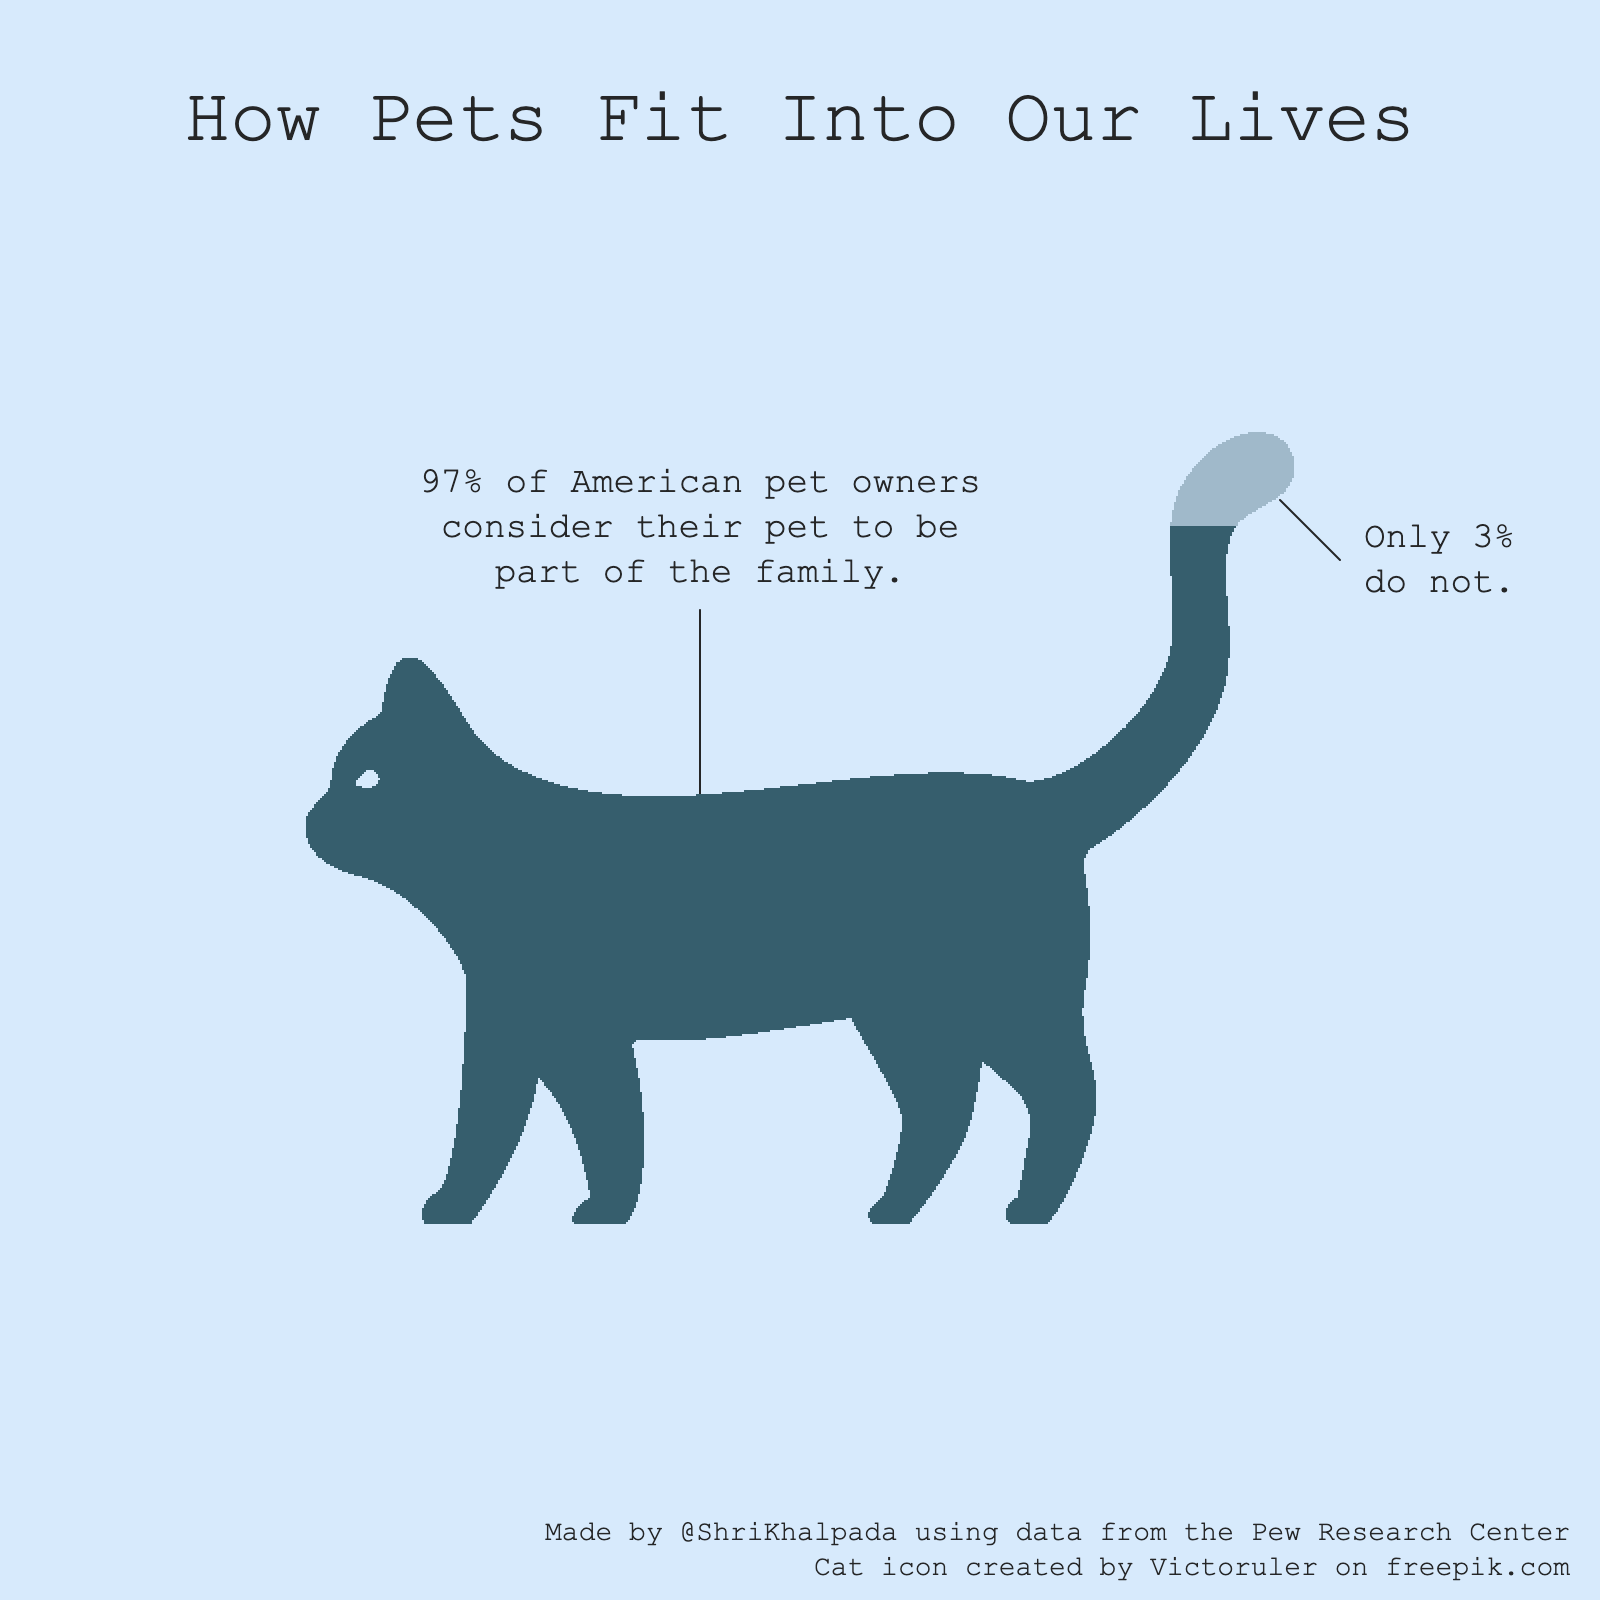 An infographic titled "How Pets Fit Into Our Lives" with a silhouette of a cat and annotations indicating that 97% of American pet owners consider their pet to be part of the family.